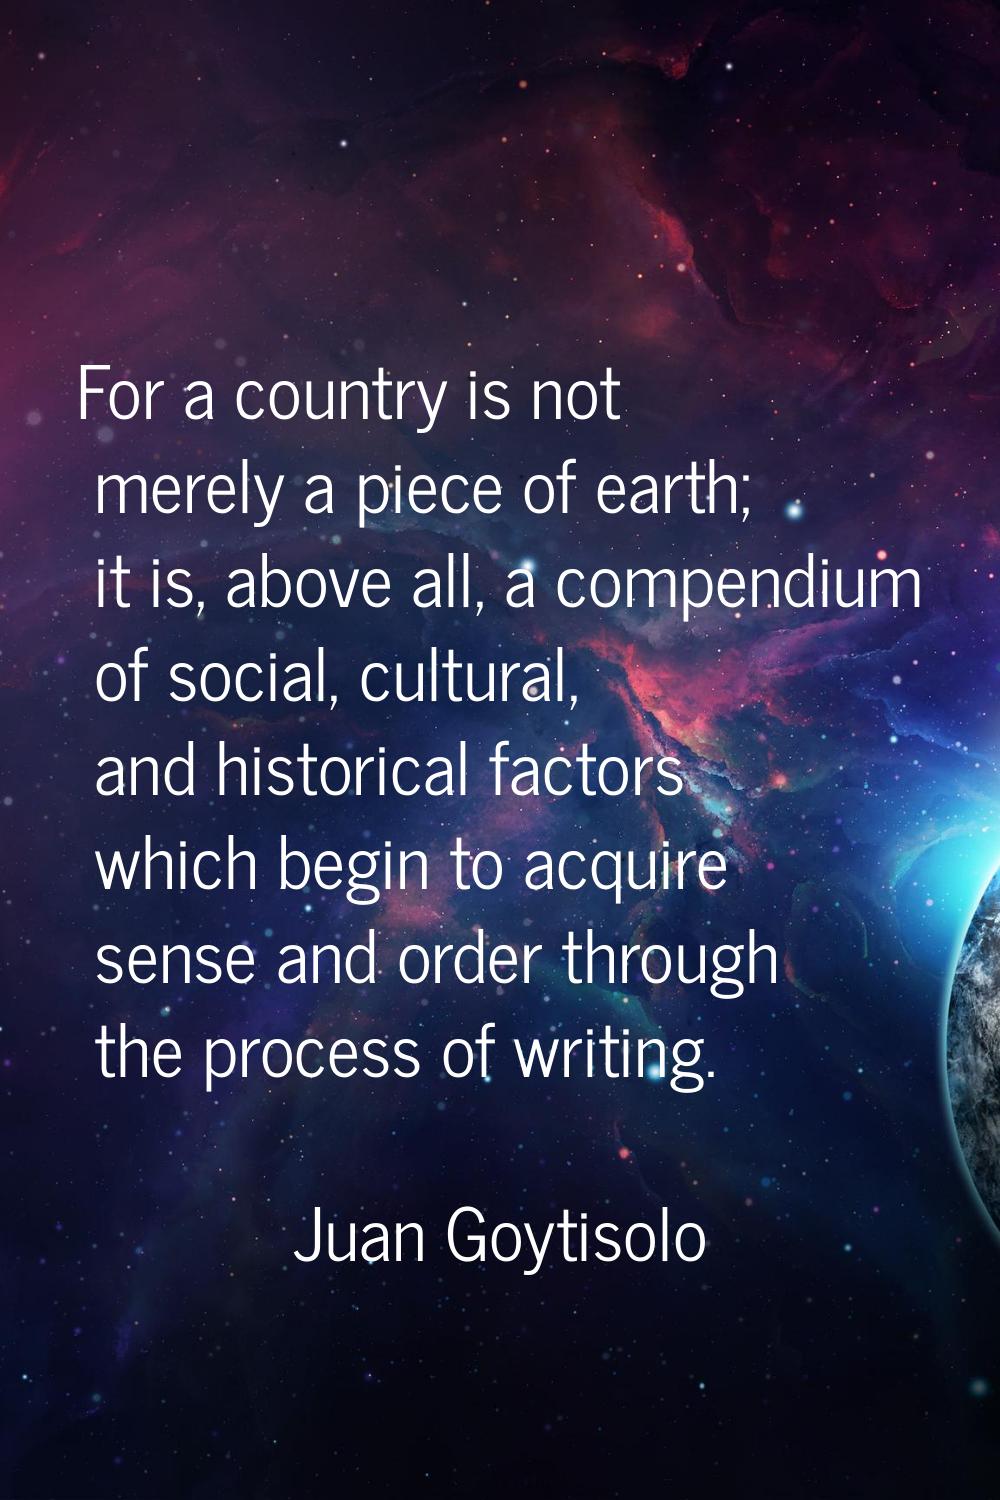 For a country is not merely a piece of earth; it is, above all, a compendium of social, cultural, a